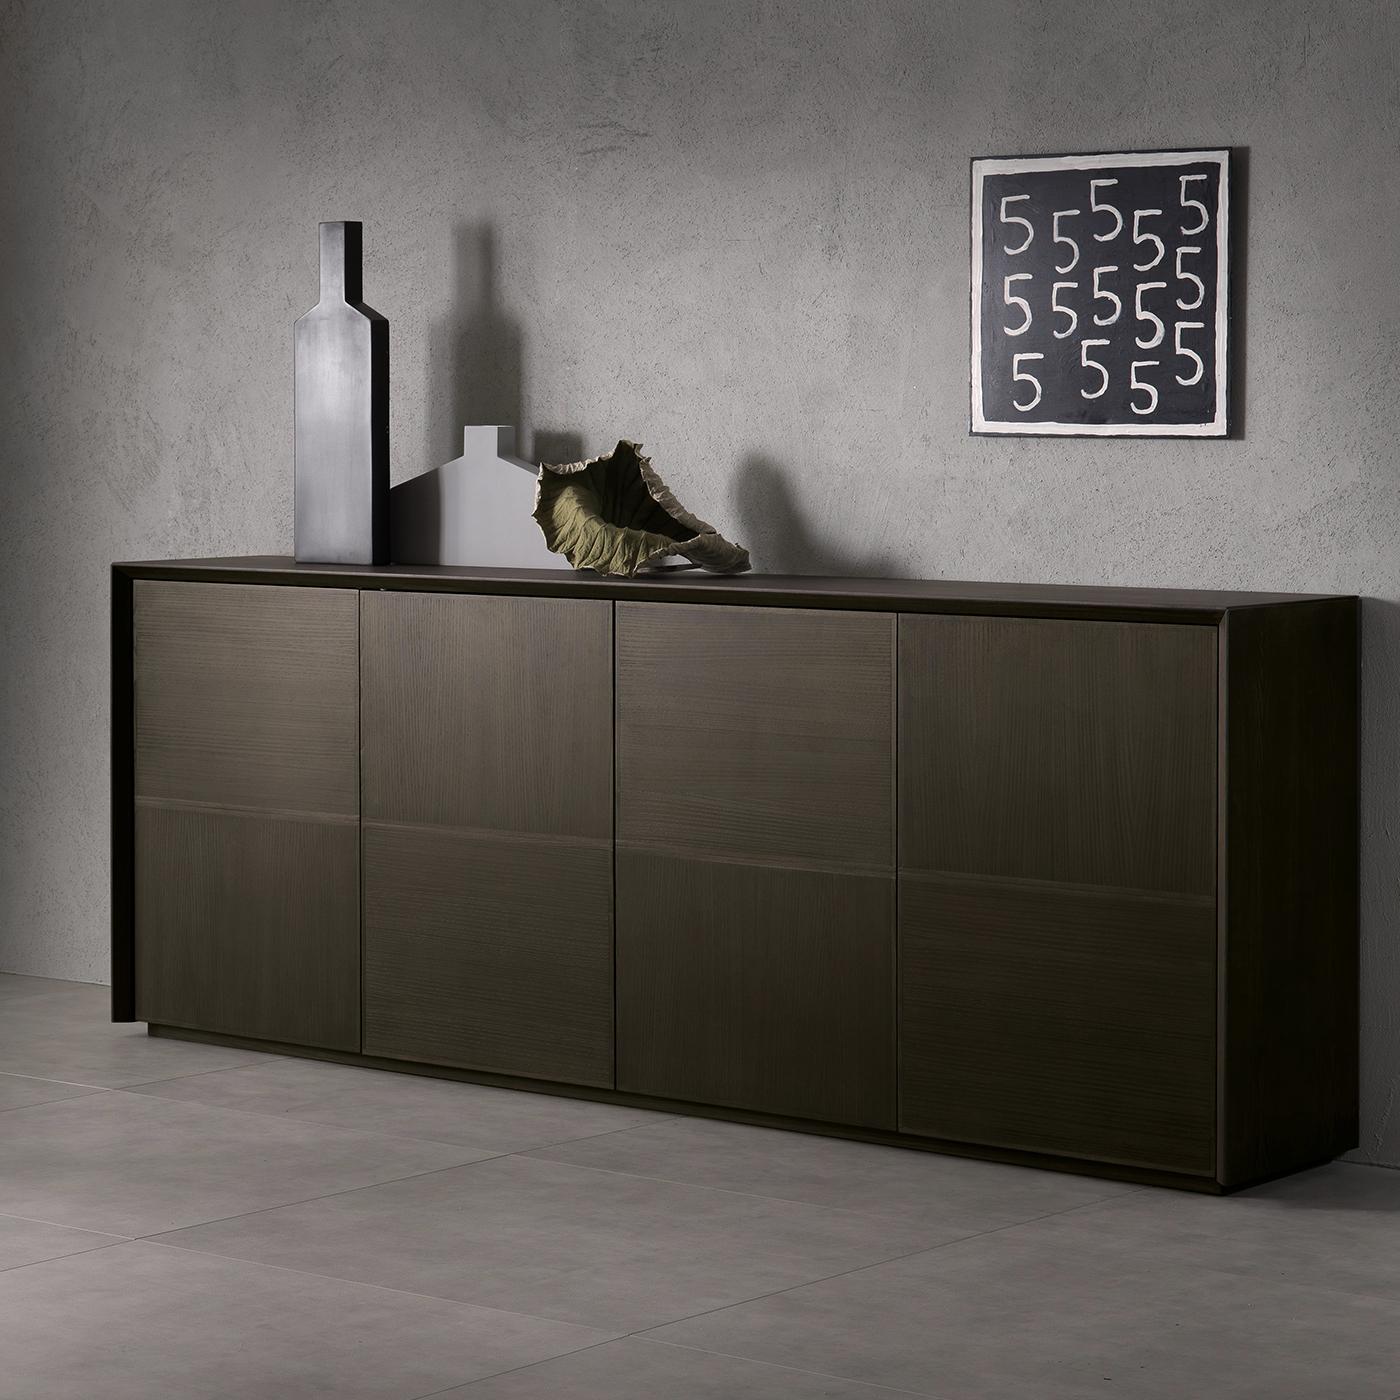 This elegant sideboard was designed by Giuliano Cappelletti and crafted of wood with the exterior veneered in ash and profiles in solid ash. Inside, the versatile storage space is separated by shelves in wood. The front panels create a geometric